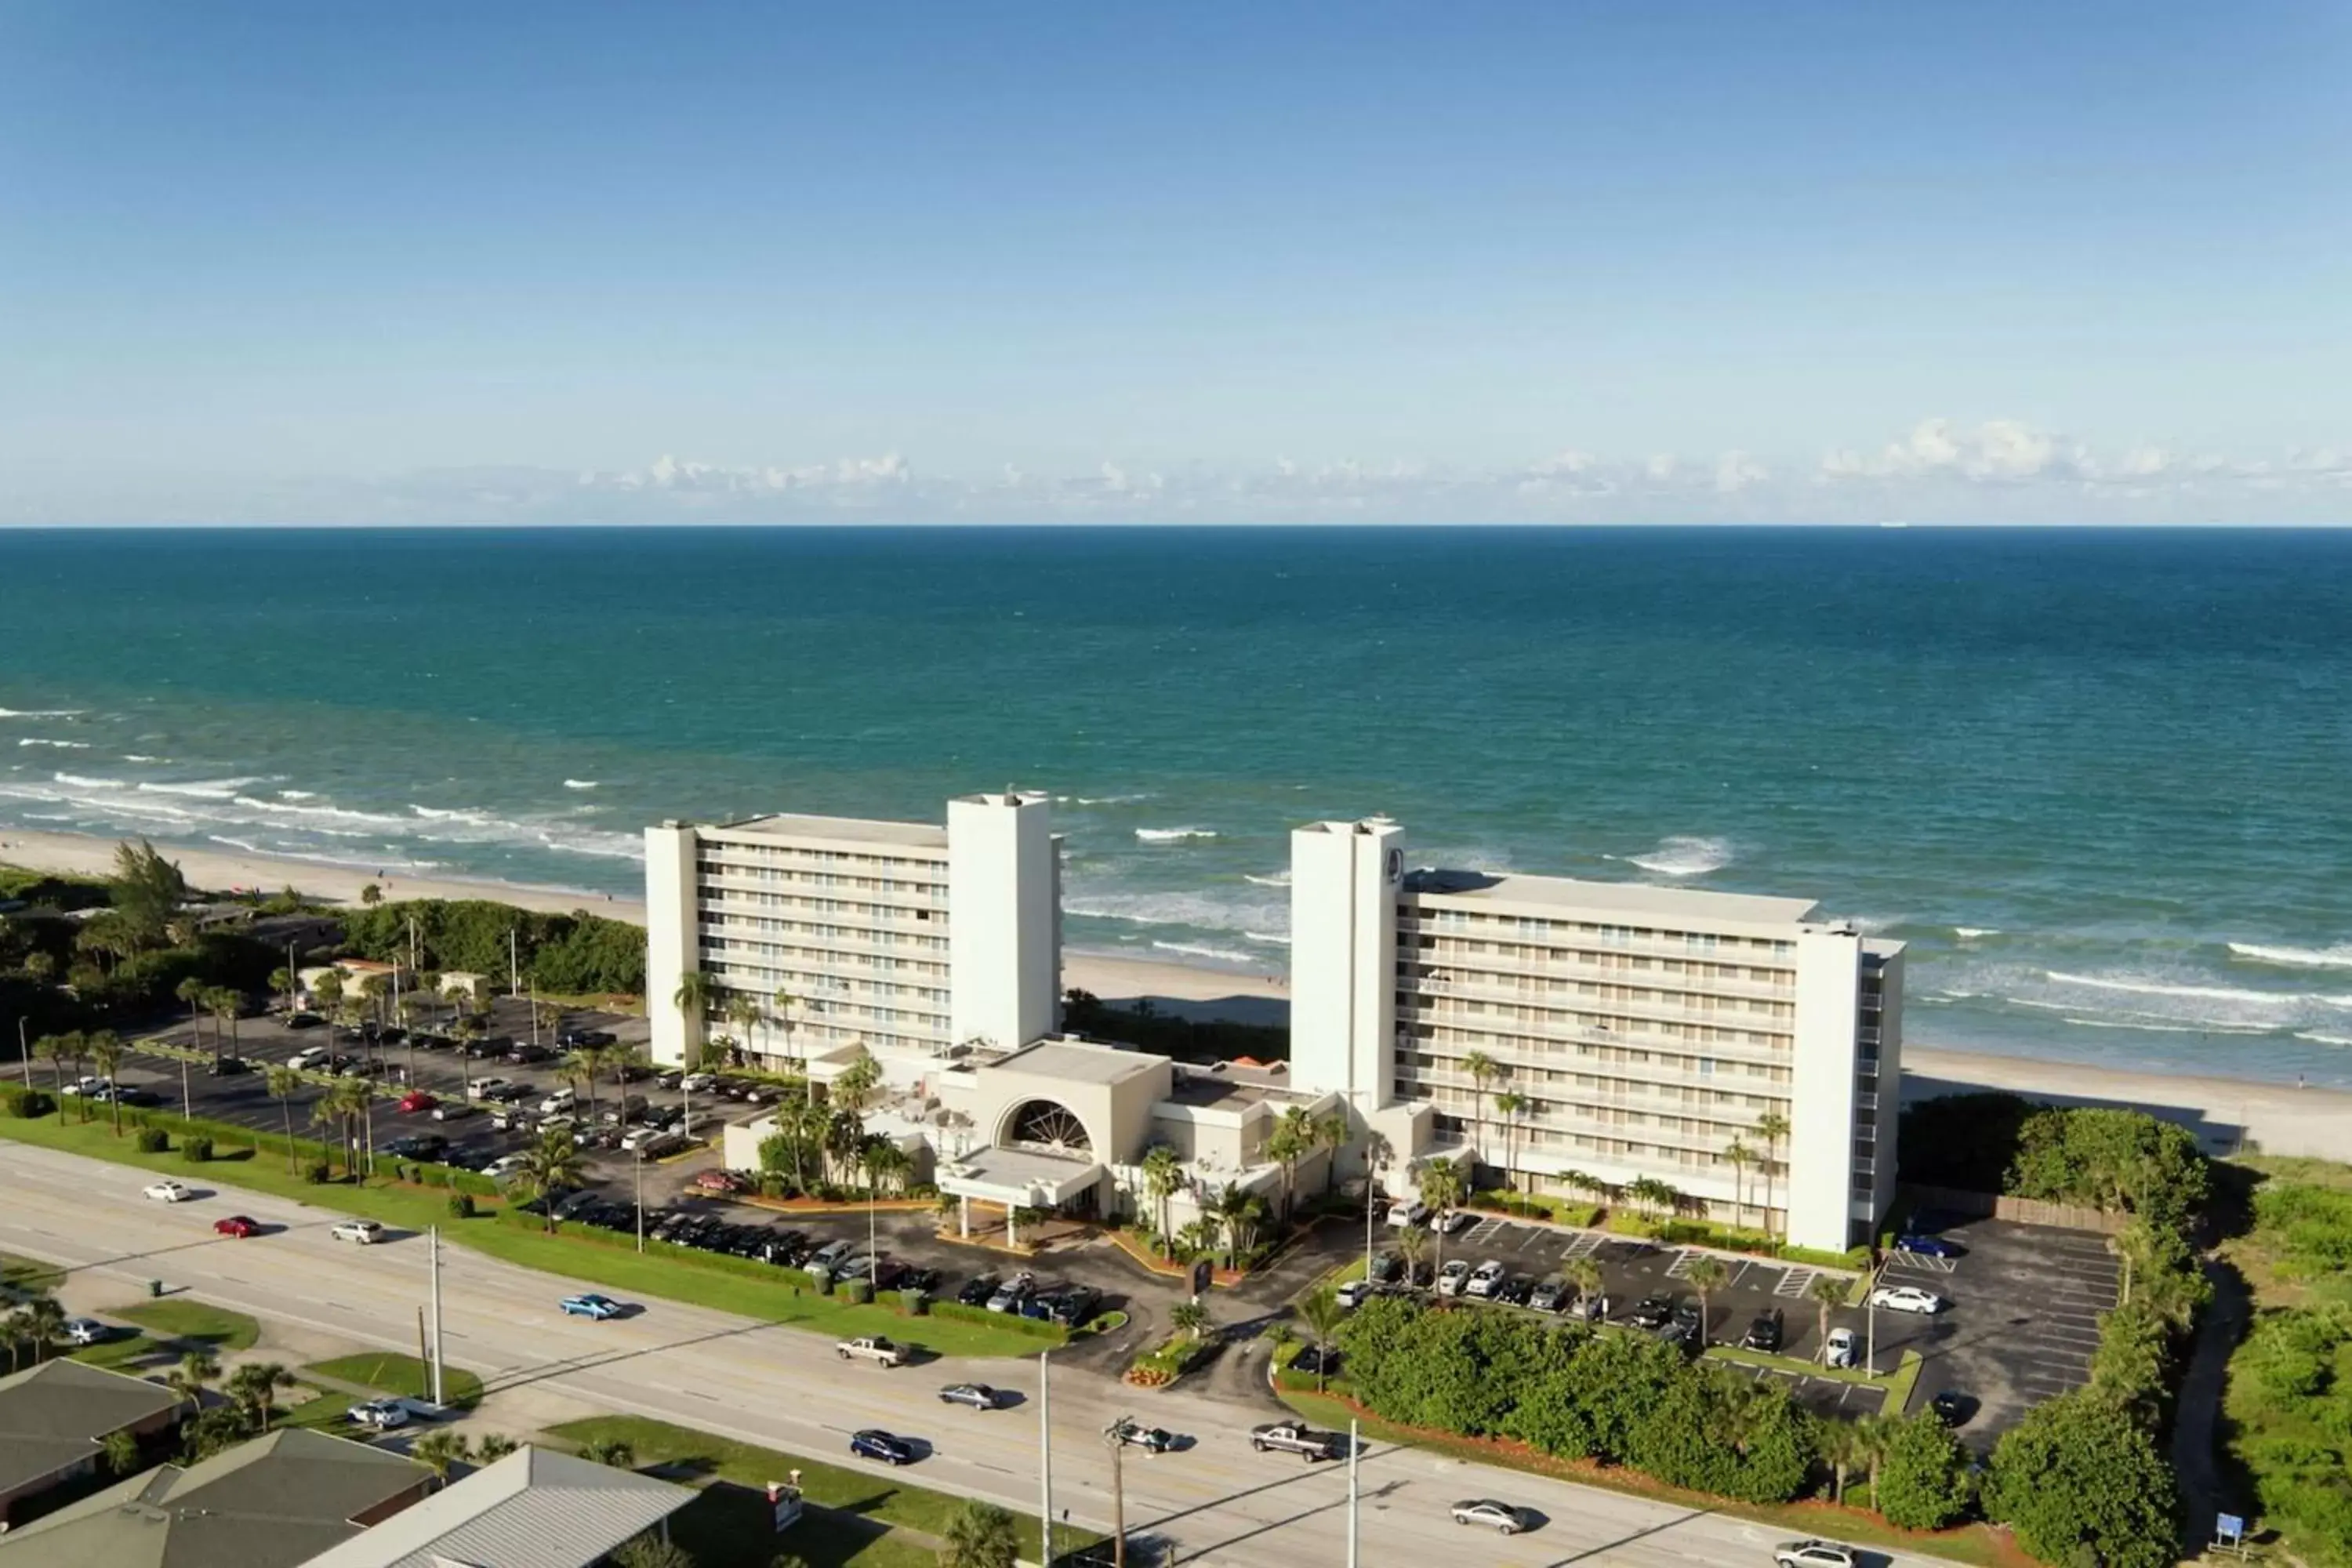 Property building, Bird's-eye View in DoubleTree Suites by Hilton Melbourne Beach Oceanfront